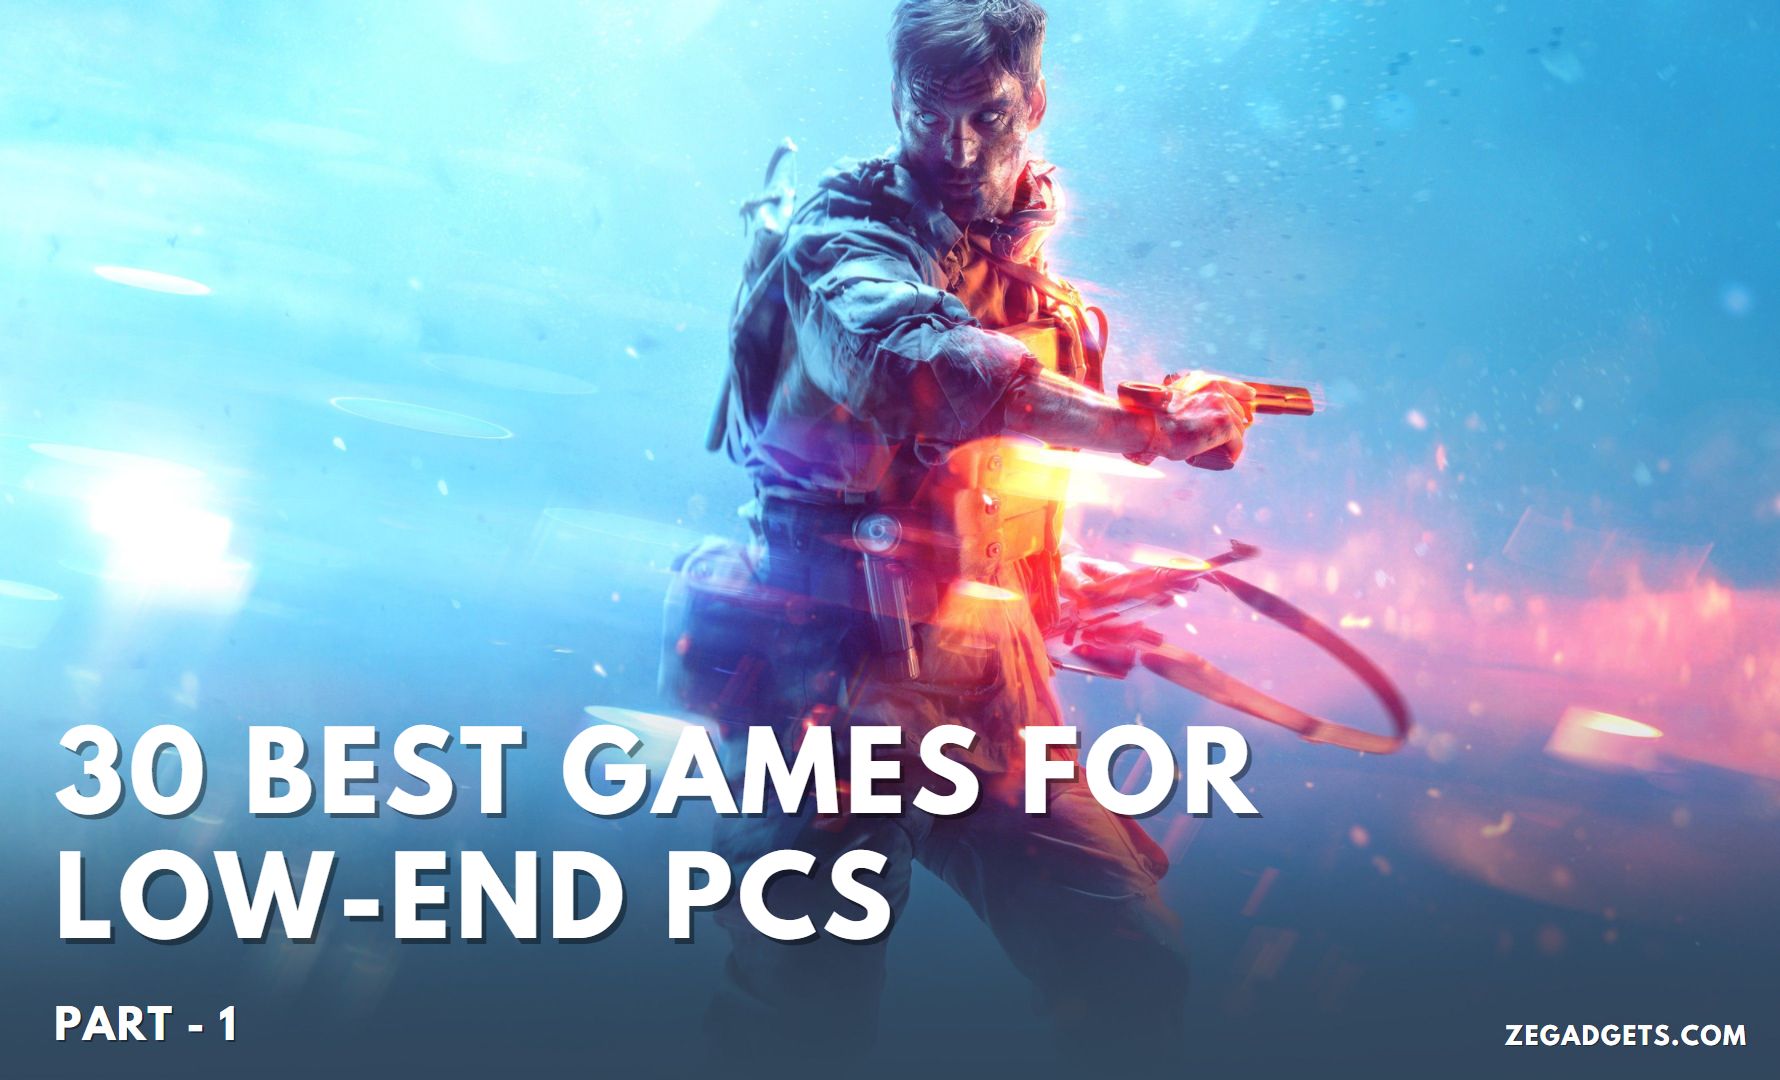 10 Best Free Games For Low-End PCs